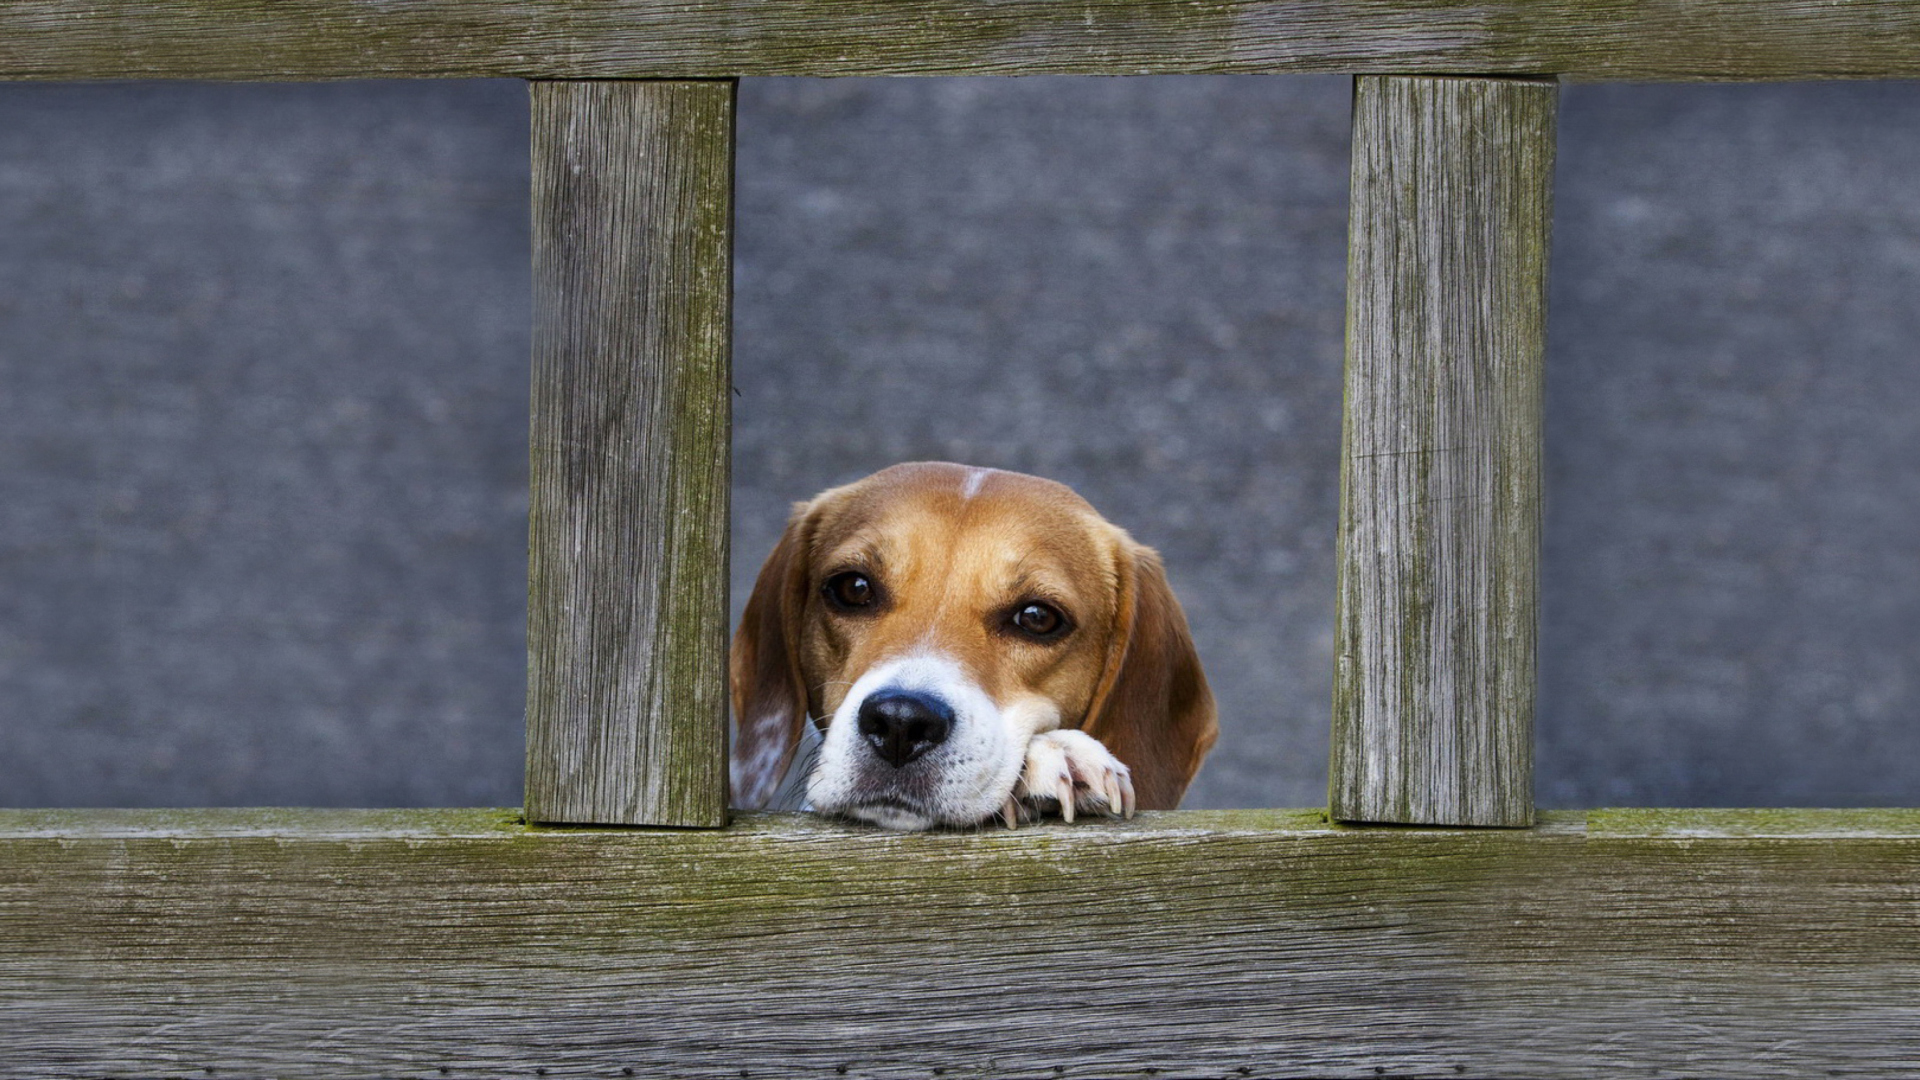 Dog Behind Wooden Fence wallpaper 1920x1080